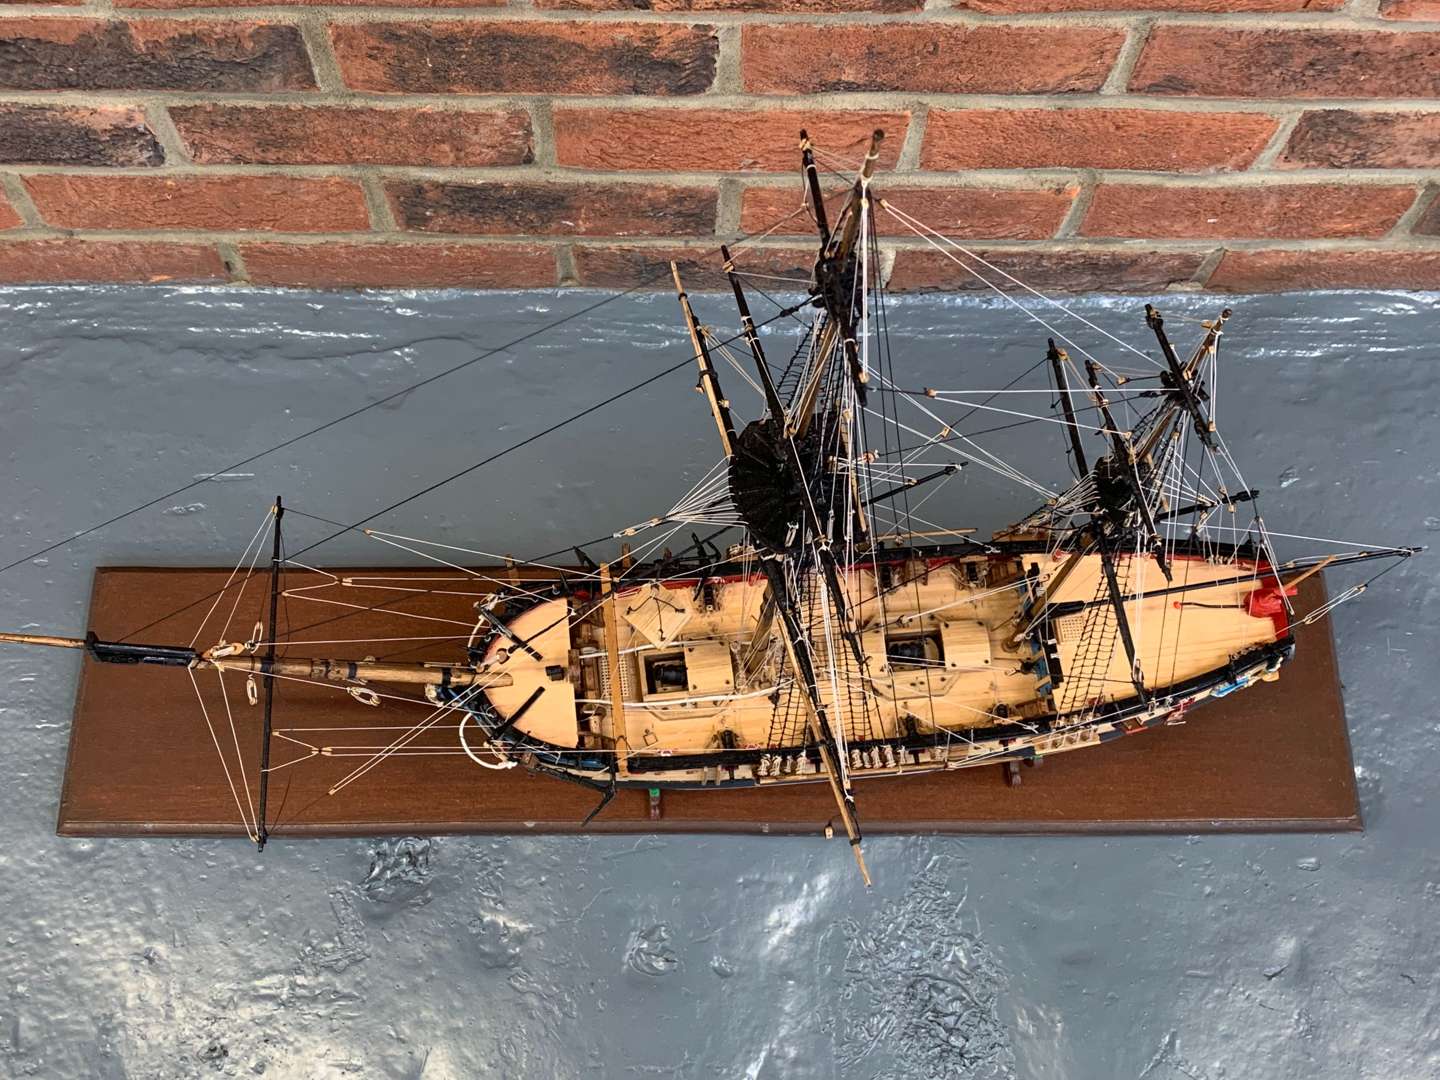 <p>Scratch Built Wooden Model of a Small Galleon</p>